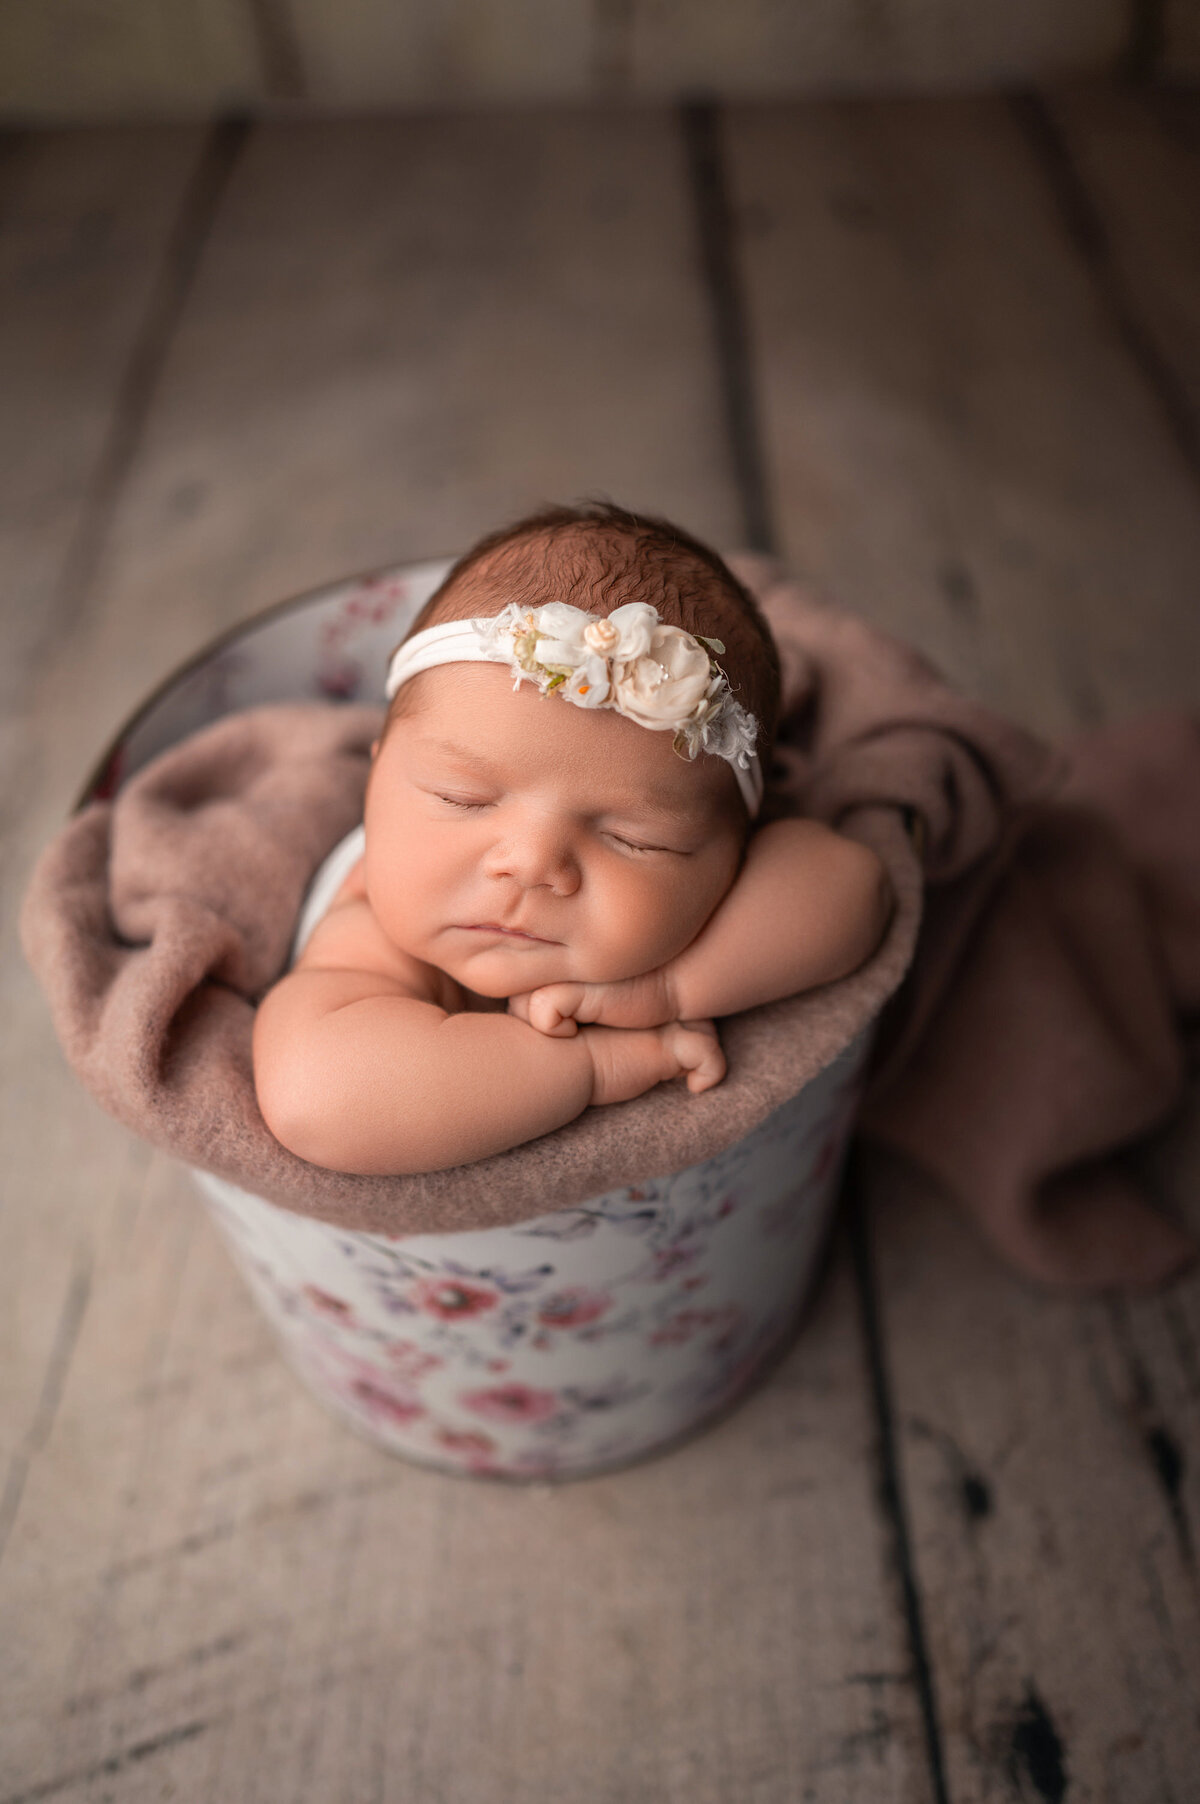 Portrait of a baby girl asleep in a  metal bucket with floral print. Baby is wearing a floral headband and wrapped in a soft, neutral blanket.